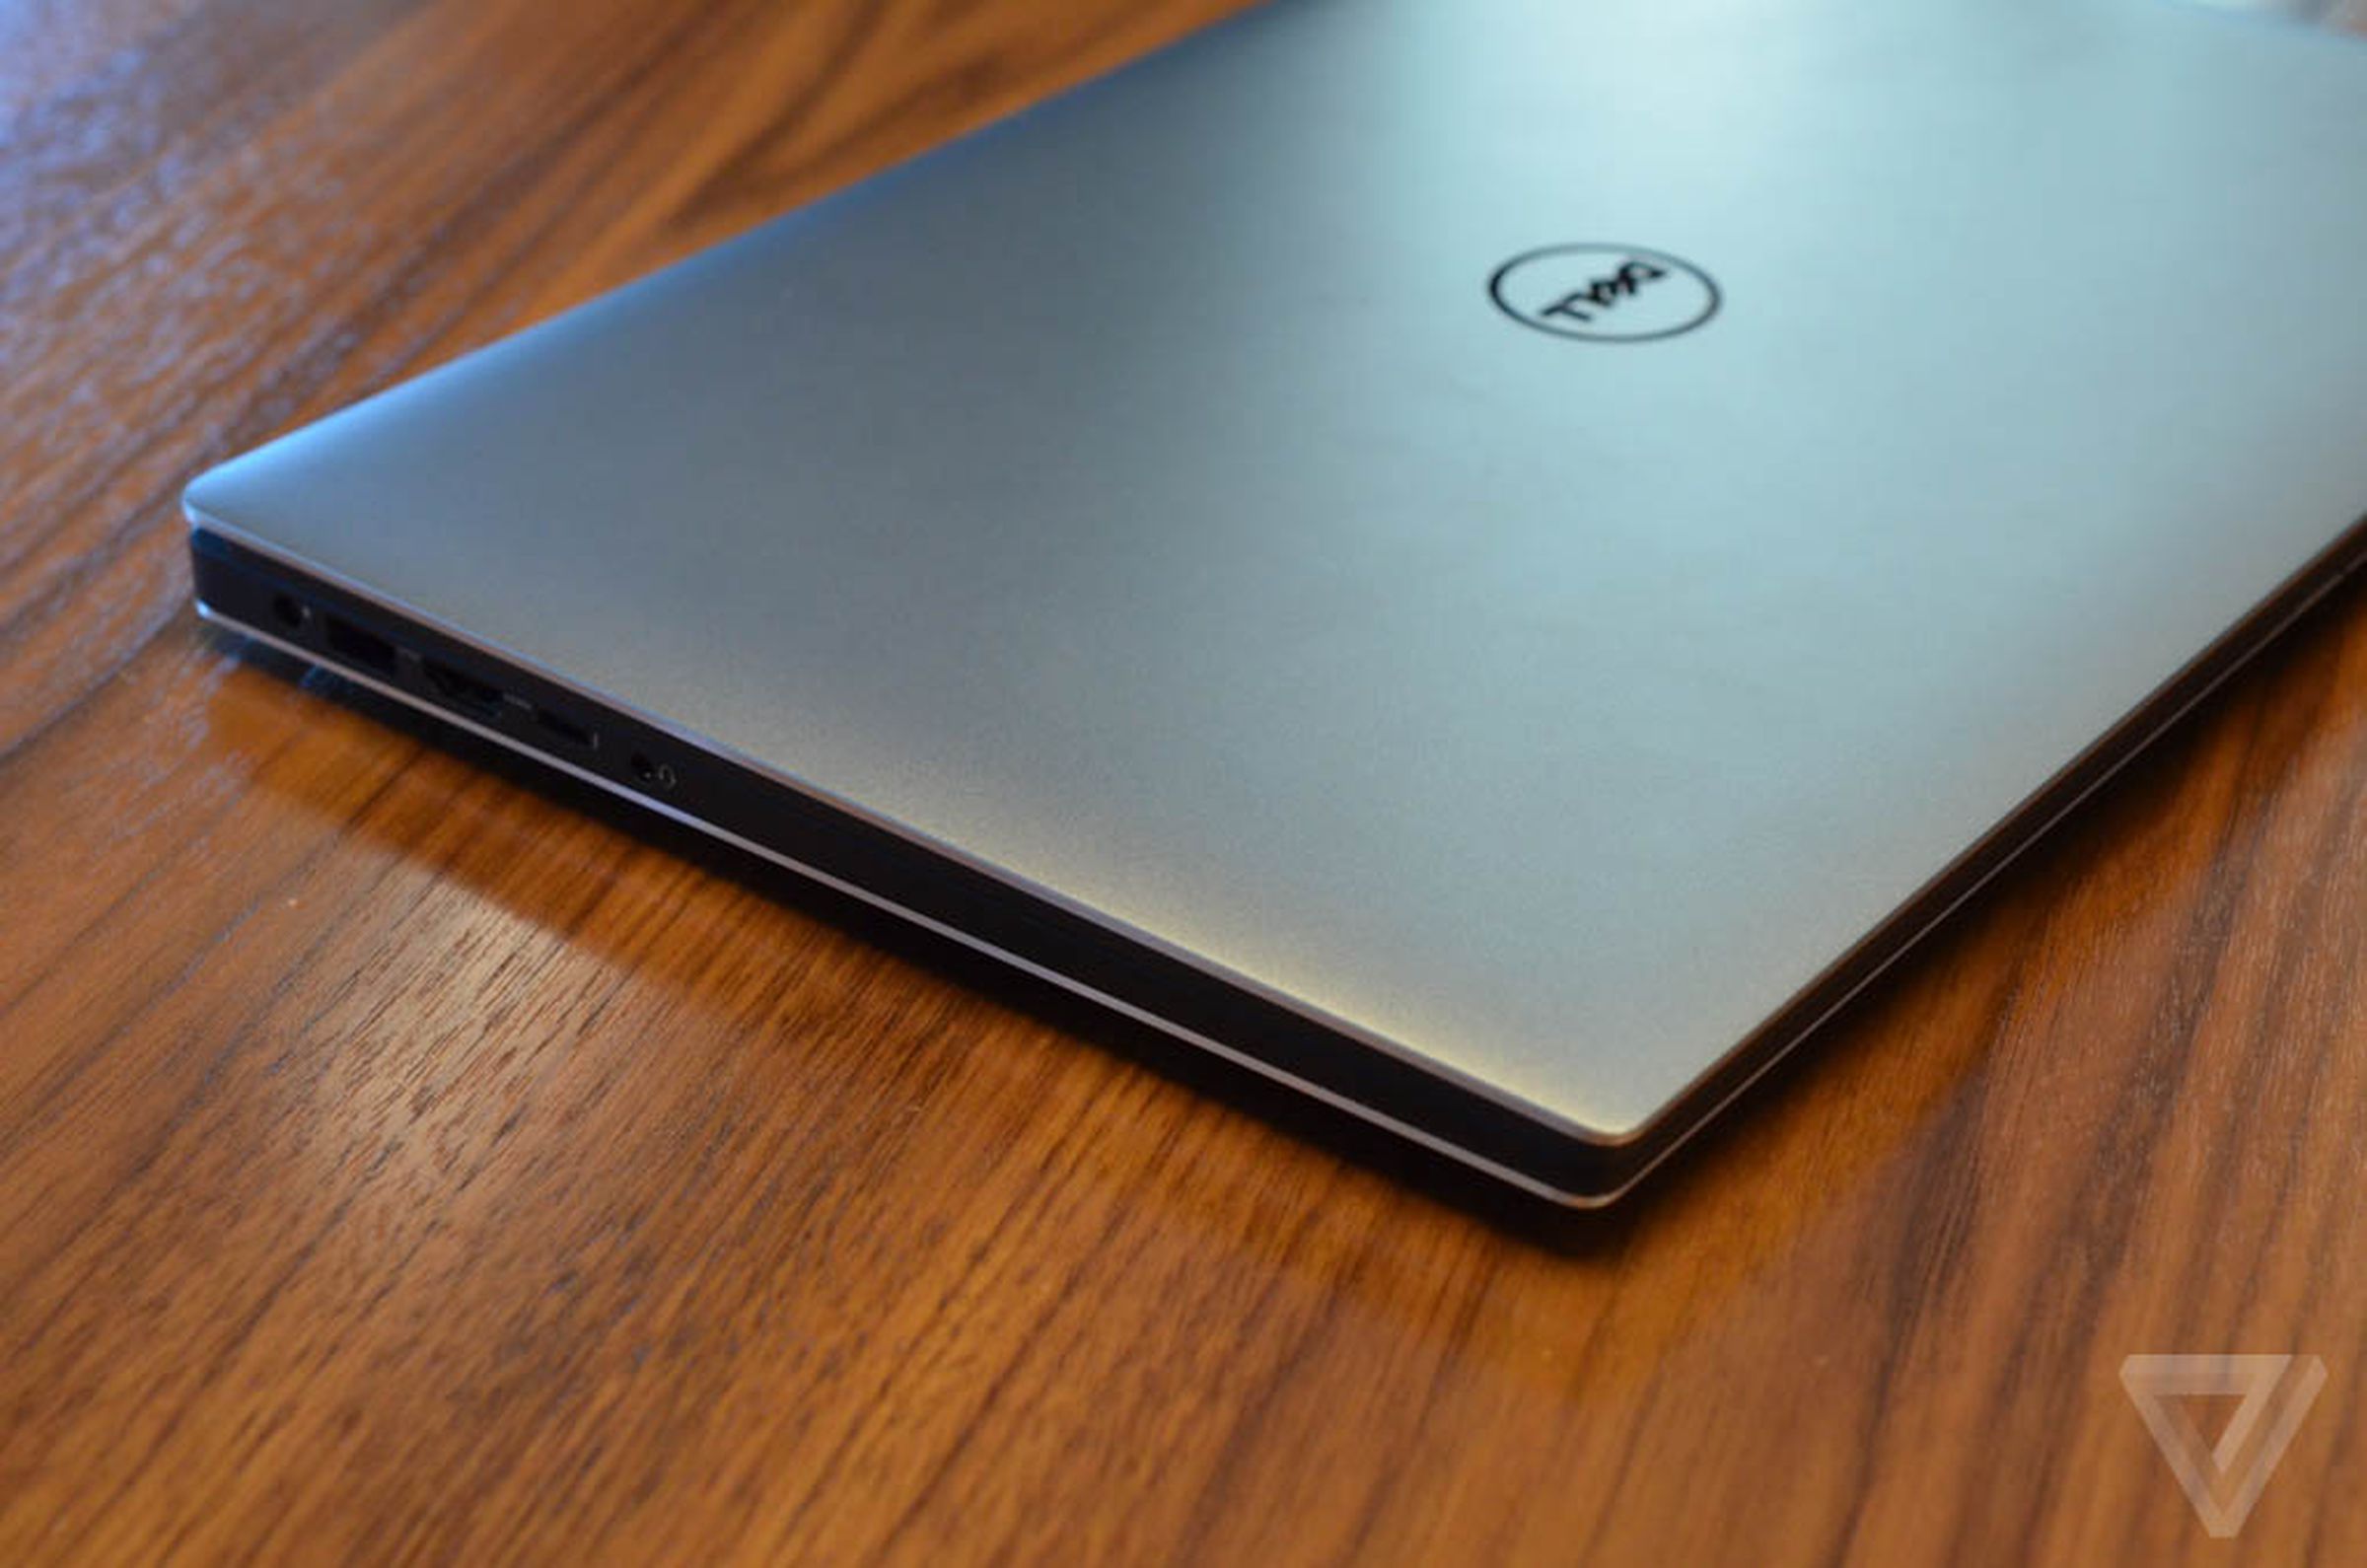 Dell XPS 15 (2015) hands-on photos